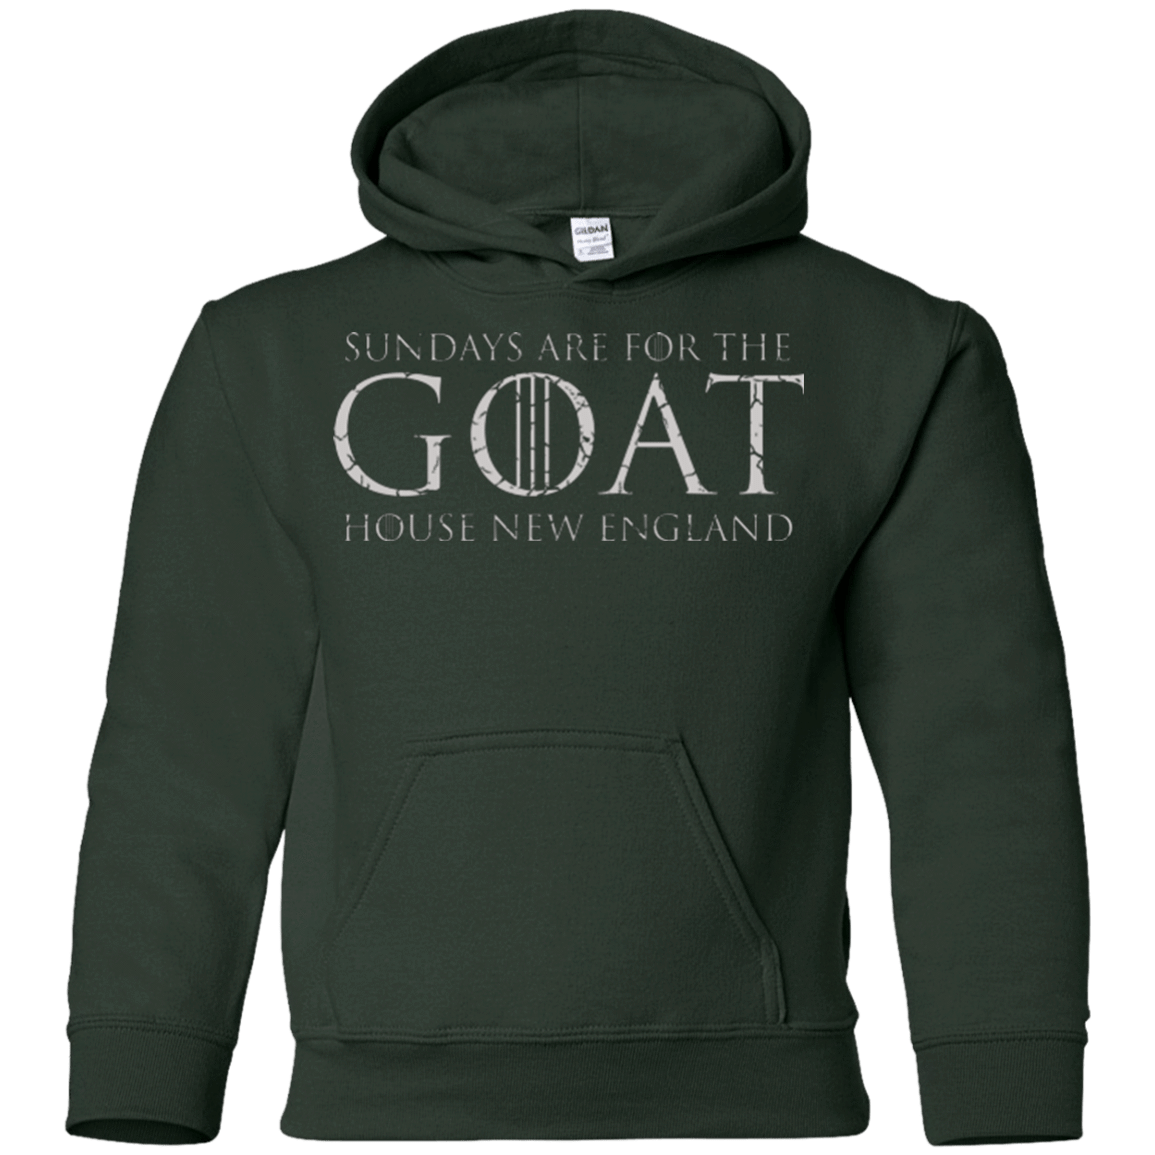 Sweatshirts Forest Green / YS GOAT Youth Hoodie